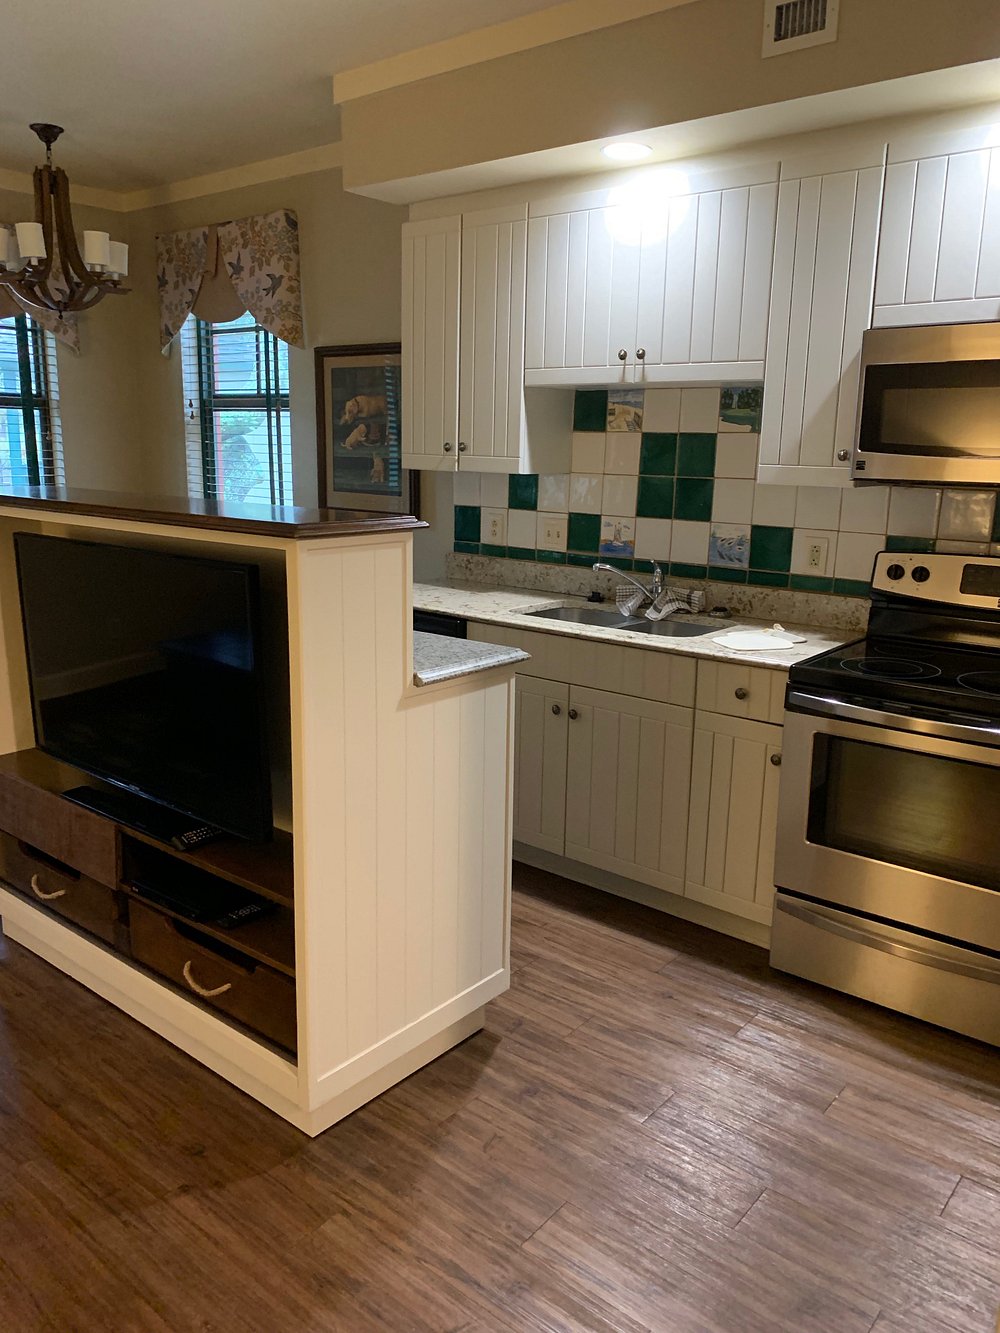 kitchen overview at hilton head